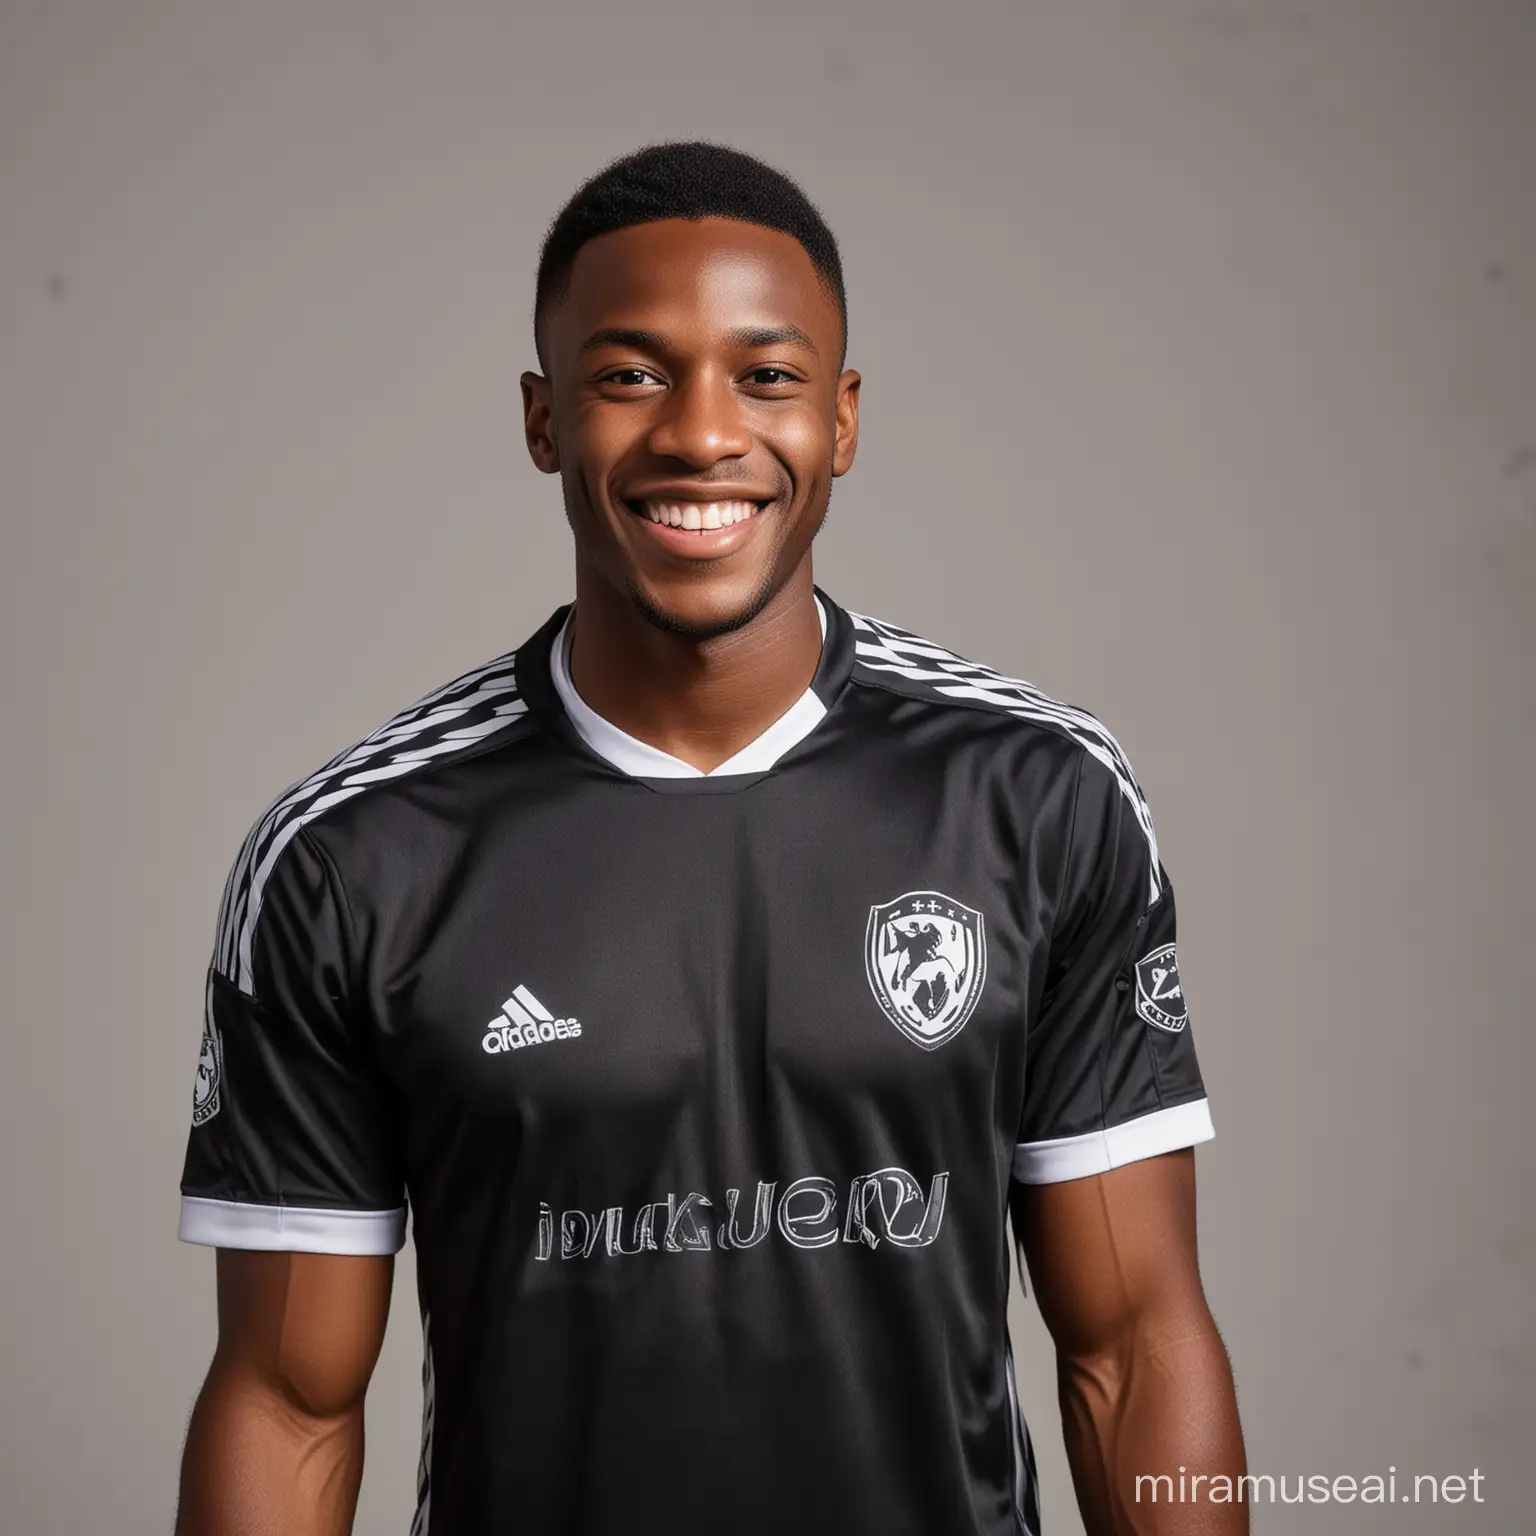 Smiling African Black Male Soccer Player in Black Jersey Against Gray Background